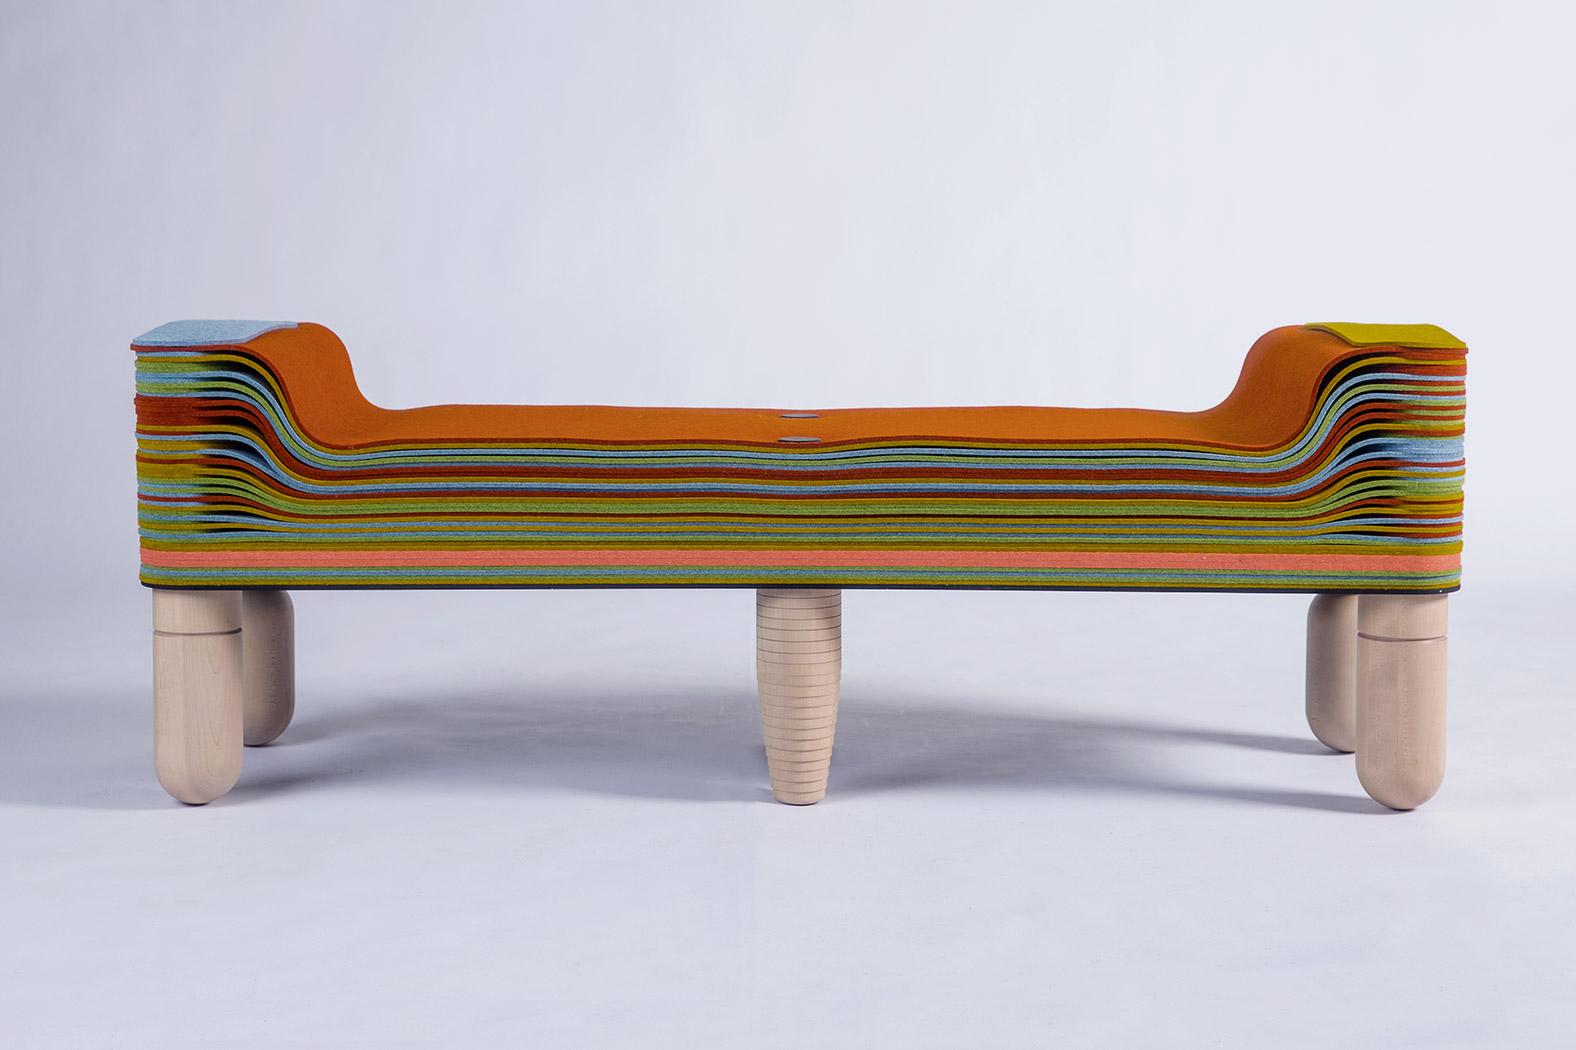 Maxine, Felt and Wood Bench, Benoist F. Drut in Stackabl, Canada, 2021 For Sale 3